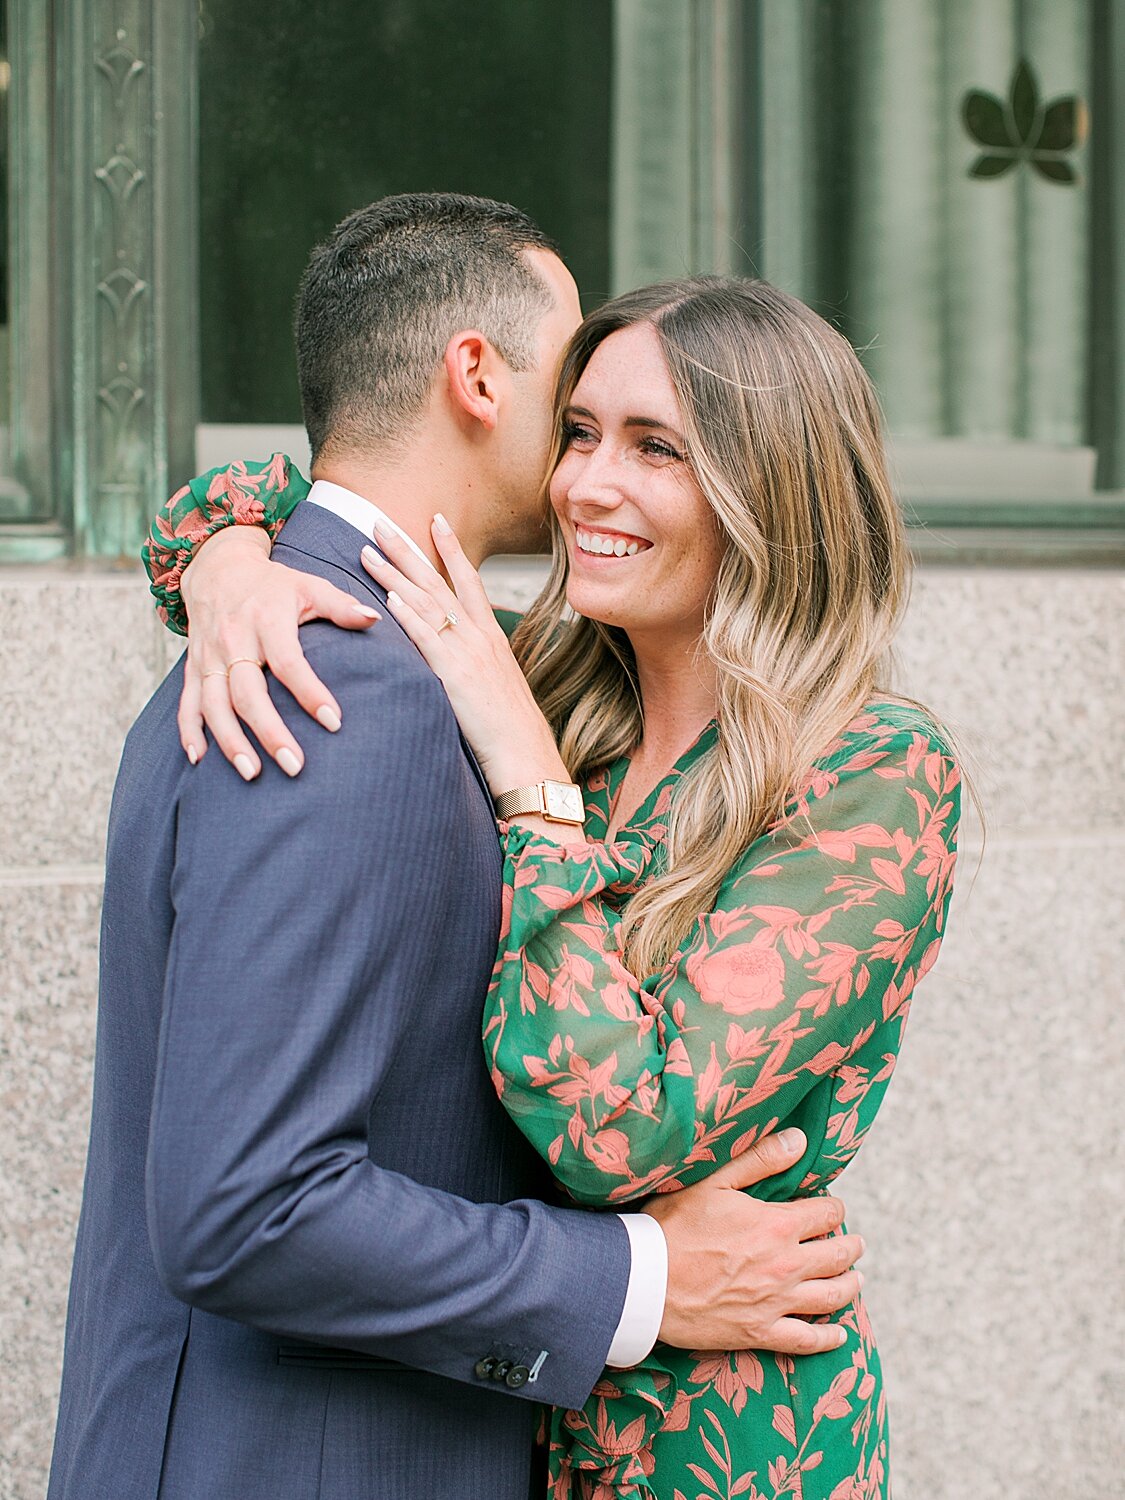 bride and groom cuddle during NYC photos | Asher Gardner Photography | The Village engagement session